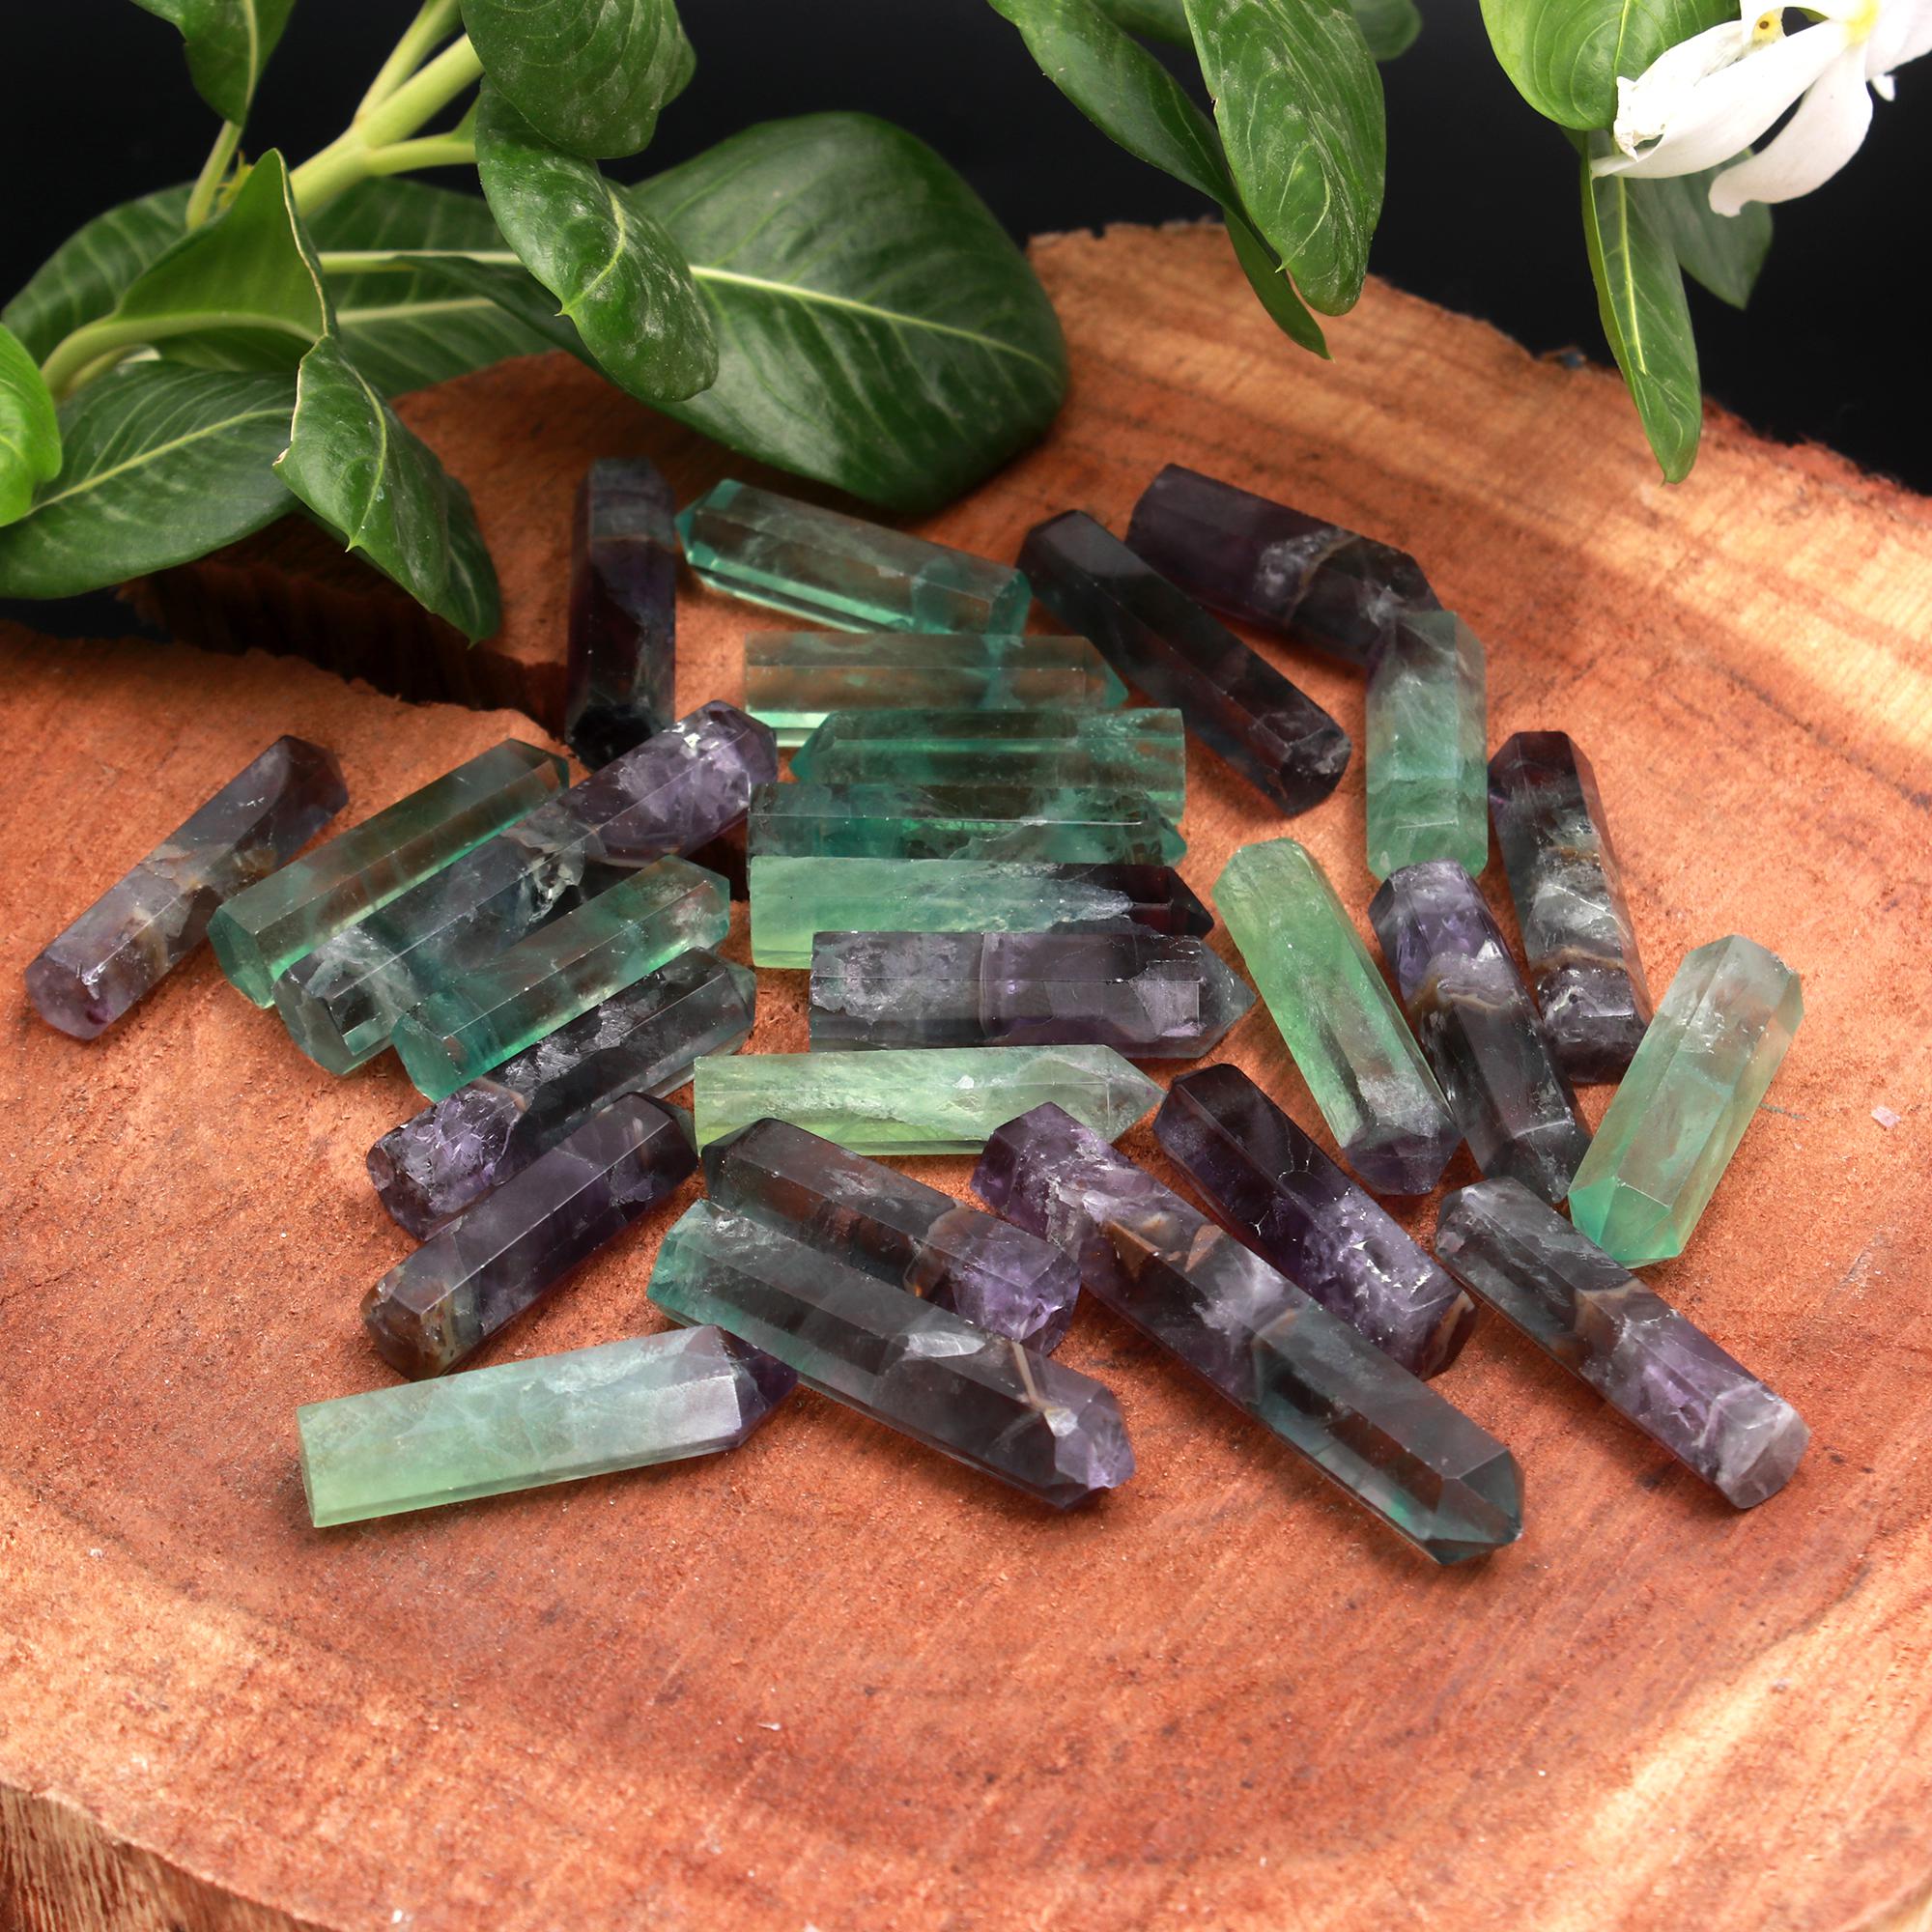 1837.Cts 62Pcs Natural Fluorite Single point Pencil Tower Loose Gemstone Wholesale Lot Size 52x9 28x8mm